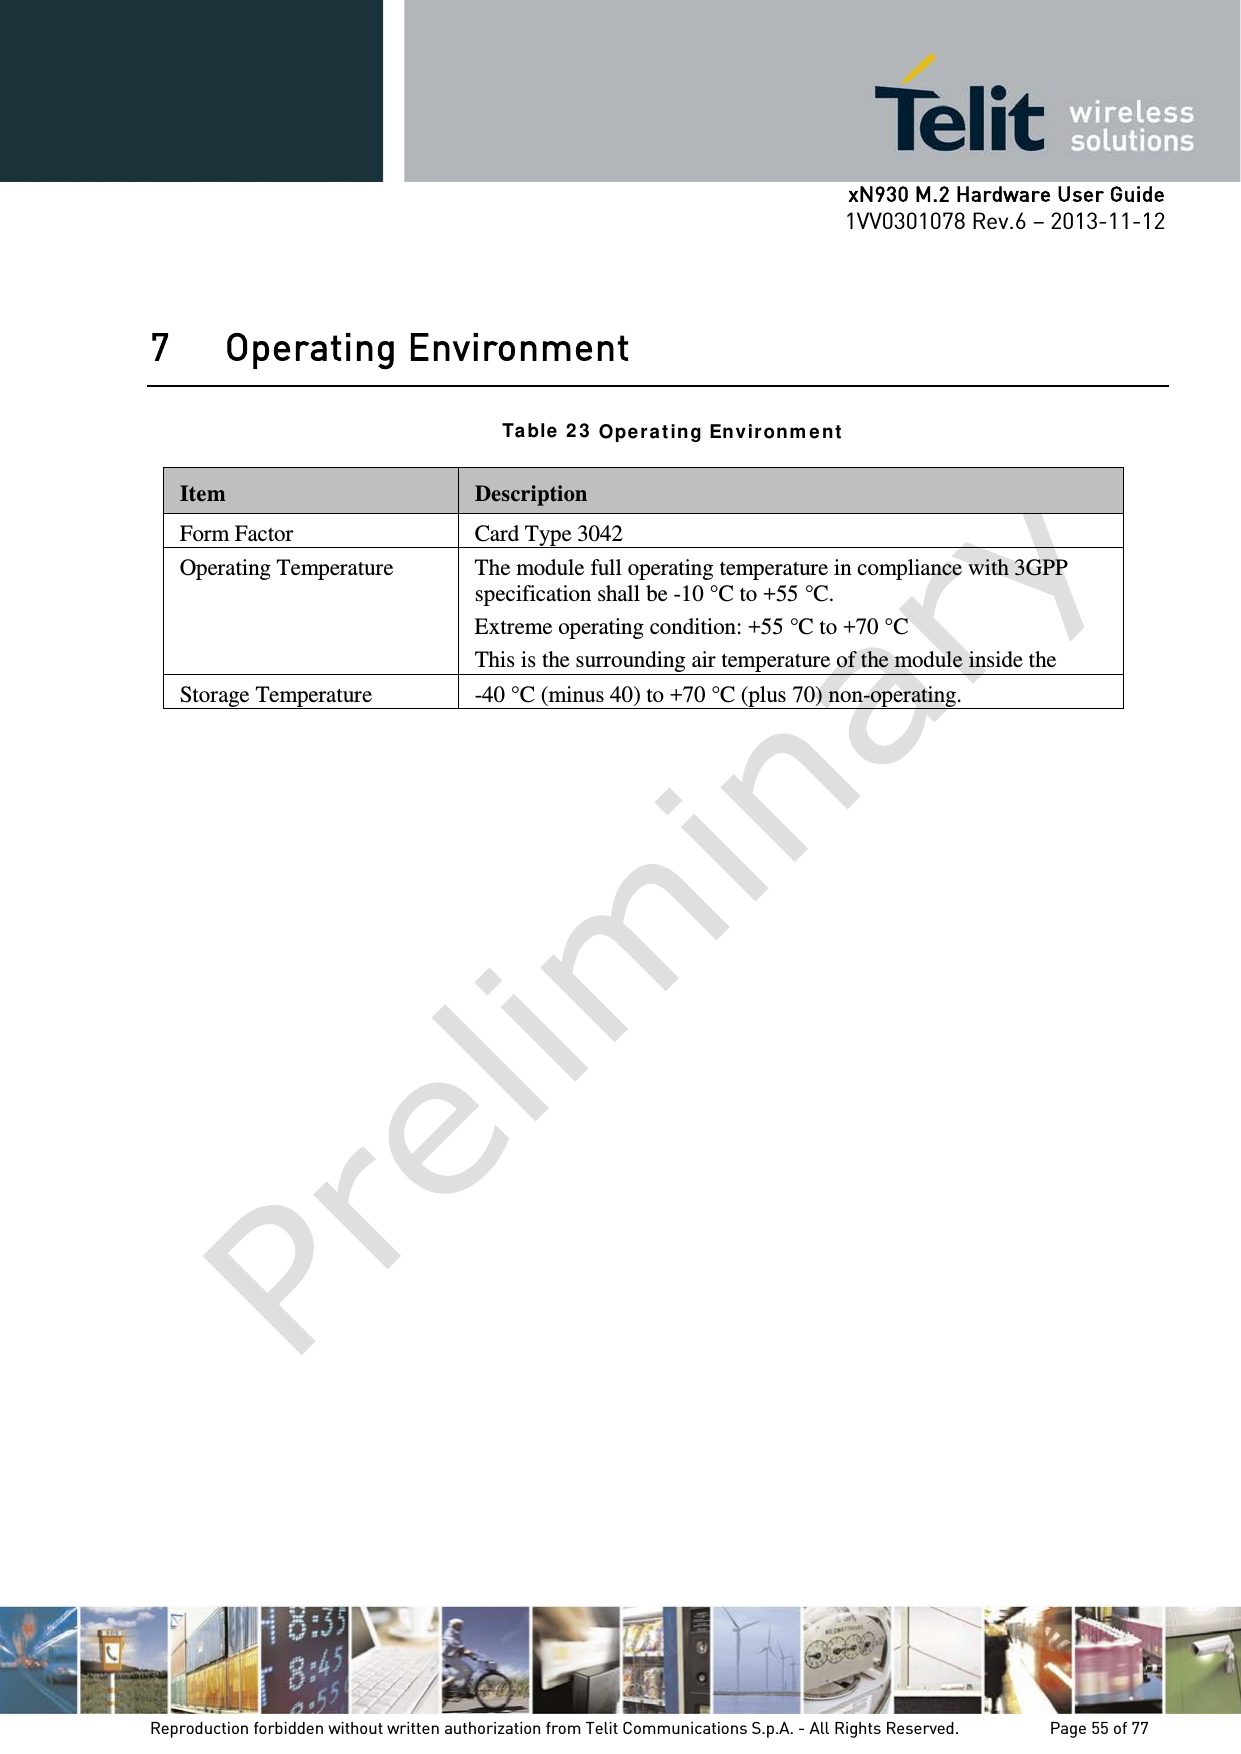      xN930 M.2 Hardware User Guide 1VV0301078 Rev.6 – 2013-11-12    7 Operating Environment  Ta ble  2 3  Opera ting Environ m ent   Item  Description Form Factor Card Type 3042 Operating Temperature  The module full operating temperature in compliance with 3GPP specification shall be -10 °C to +55 °C. Extreme operating condition: +55 °C to +70 °C This is the surrounding air temperature of the module inside the                      Storage Temperature -40 °C (minus 40) to +70 °C (plus 70) non-operating.    Reproduction forbidden without written authorization from Telit Communications S.p.A. - All Rights Reserved.    Page 55 of 77 